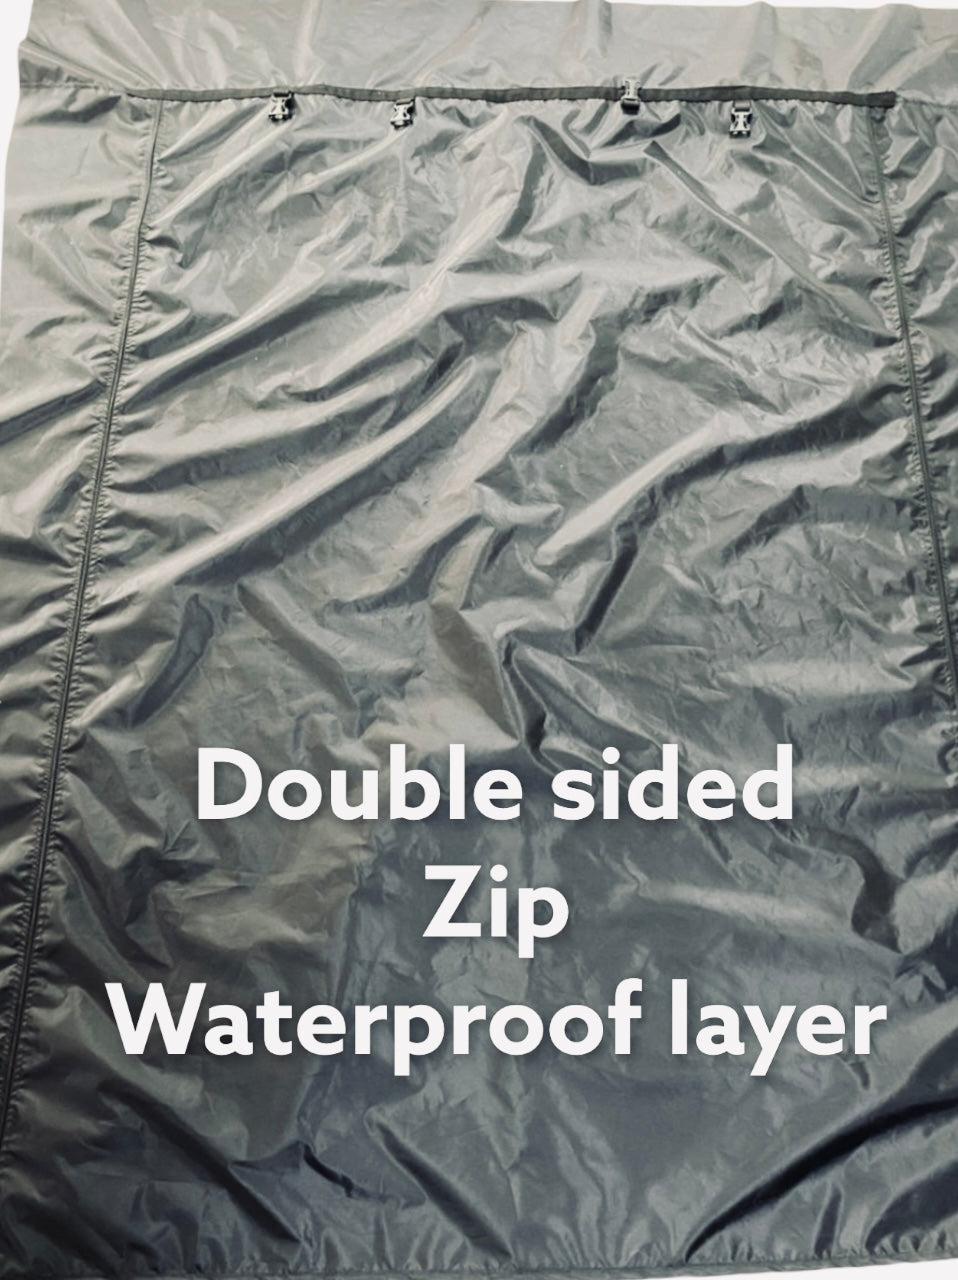 A GRADE / RETURN AS NEW) SWB VANdoûr Universal Campervan 4 in 1 Mosquito + Fly Net + Waterproof / Privacy Layer, to fit either side or rear.